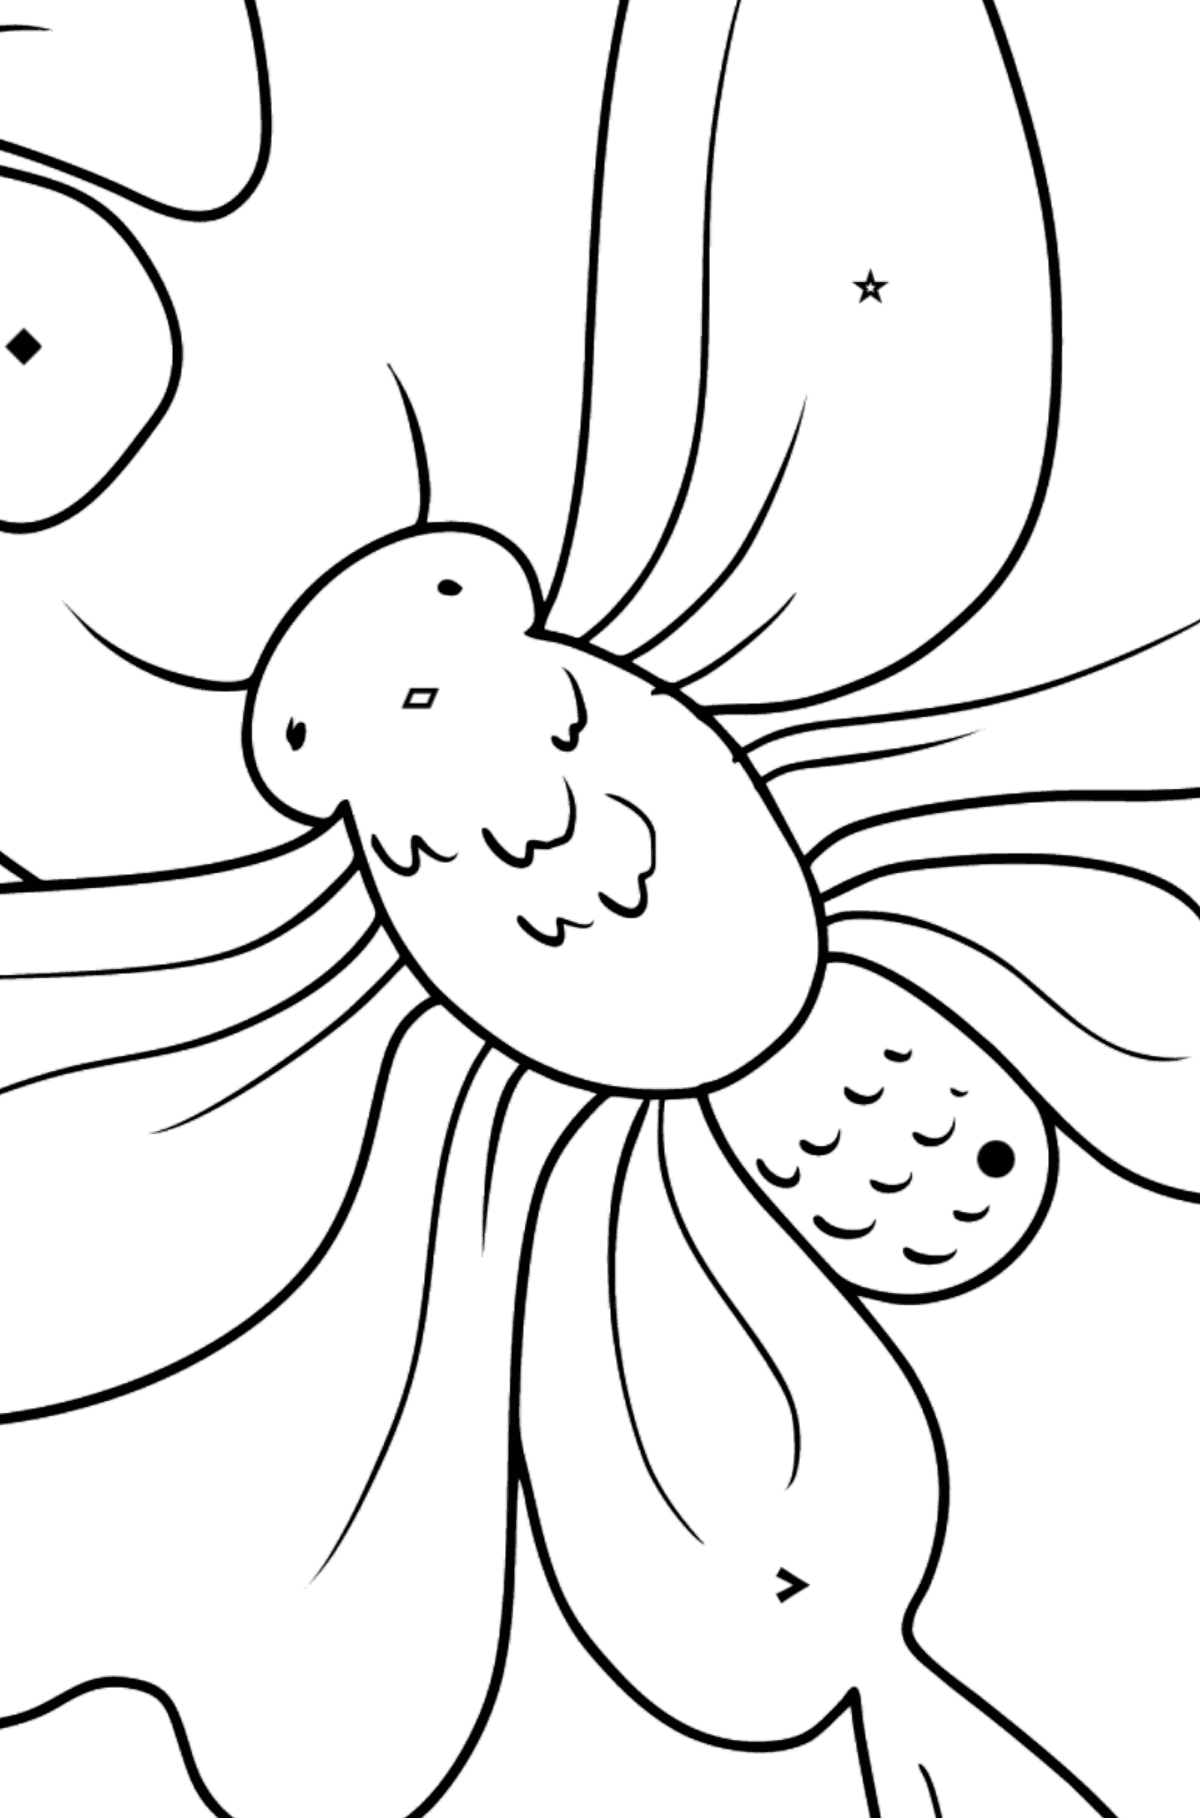 Butterfly on a Flower coloring page - Coloring by Symbols and Geometric Shapes for Kids